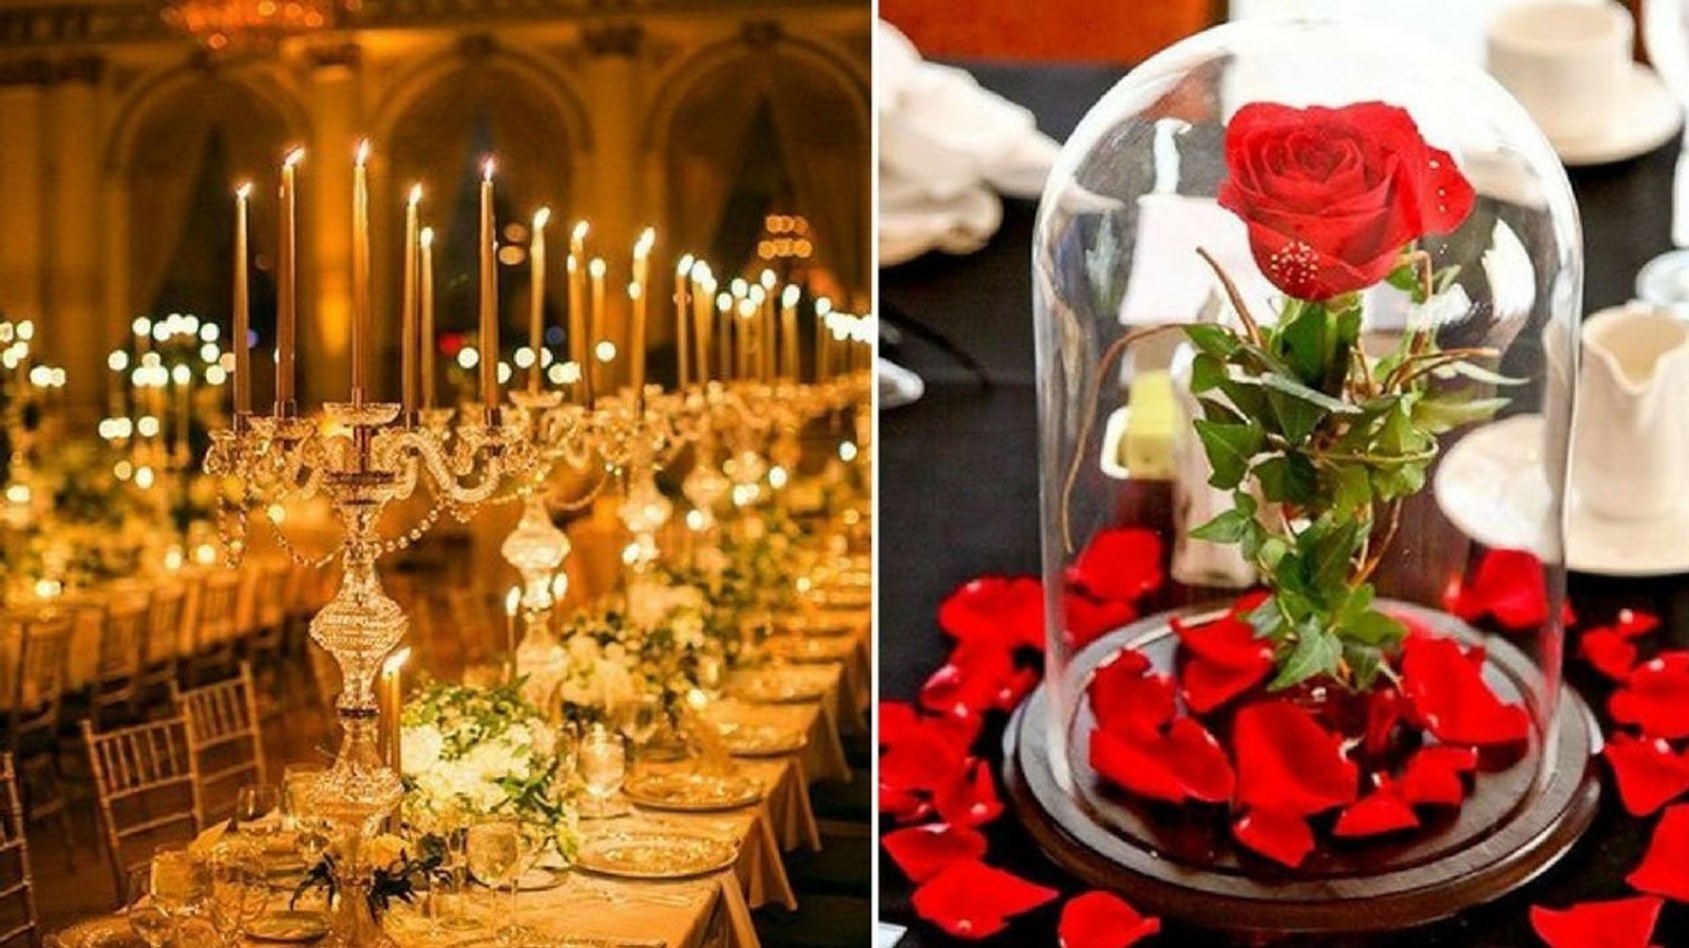 beauty and the beast wedding table decorations Bulan 4  Enchanting Wedding Ideas Inspired By Beauty And The Beast